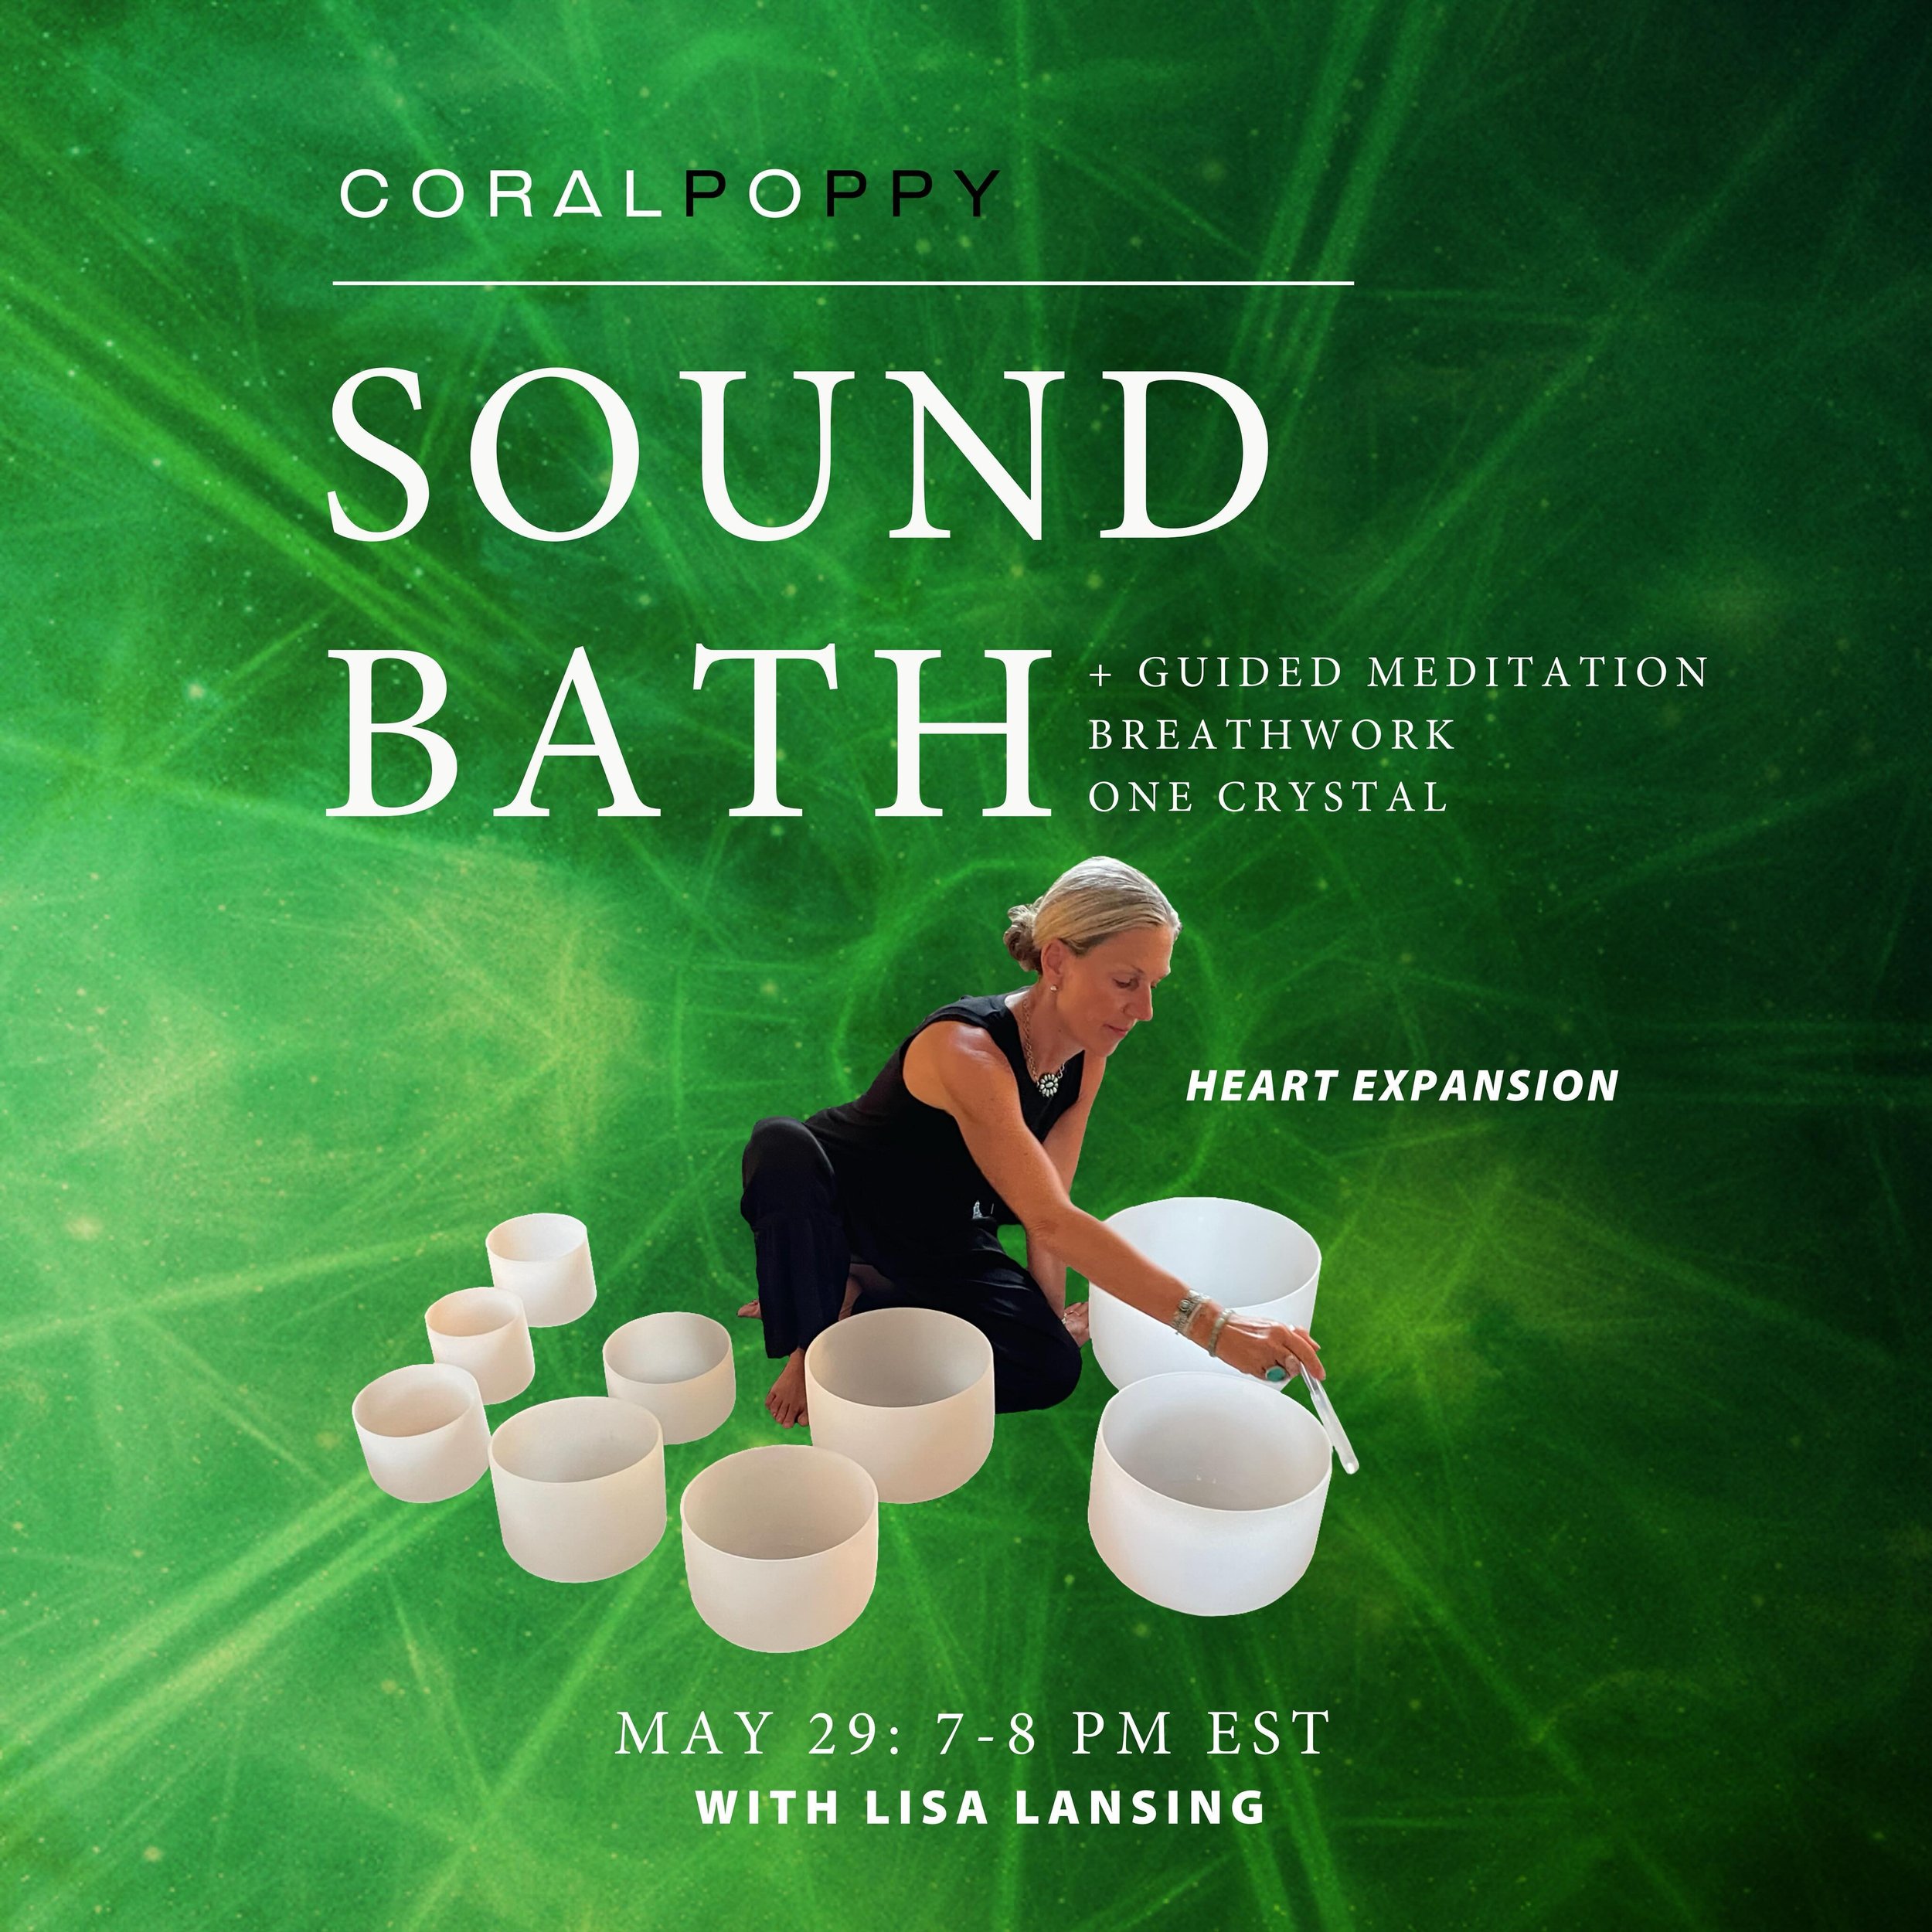 Coral Poppy&rsquo;s May Sound Bath 💚

Indulge in this immersive sound healing experience and discover the profound harmony that awaits within the depths of your soul.

Each participant will receive a precious Crystal to take home. These sacred stone